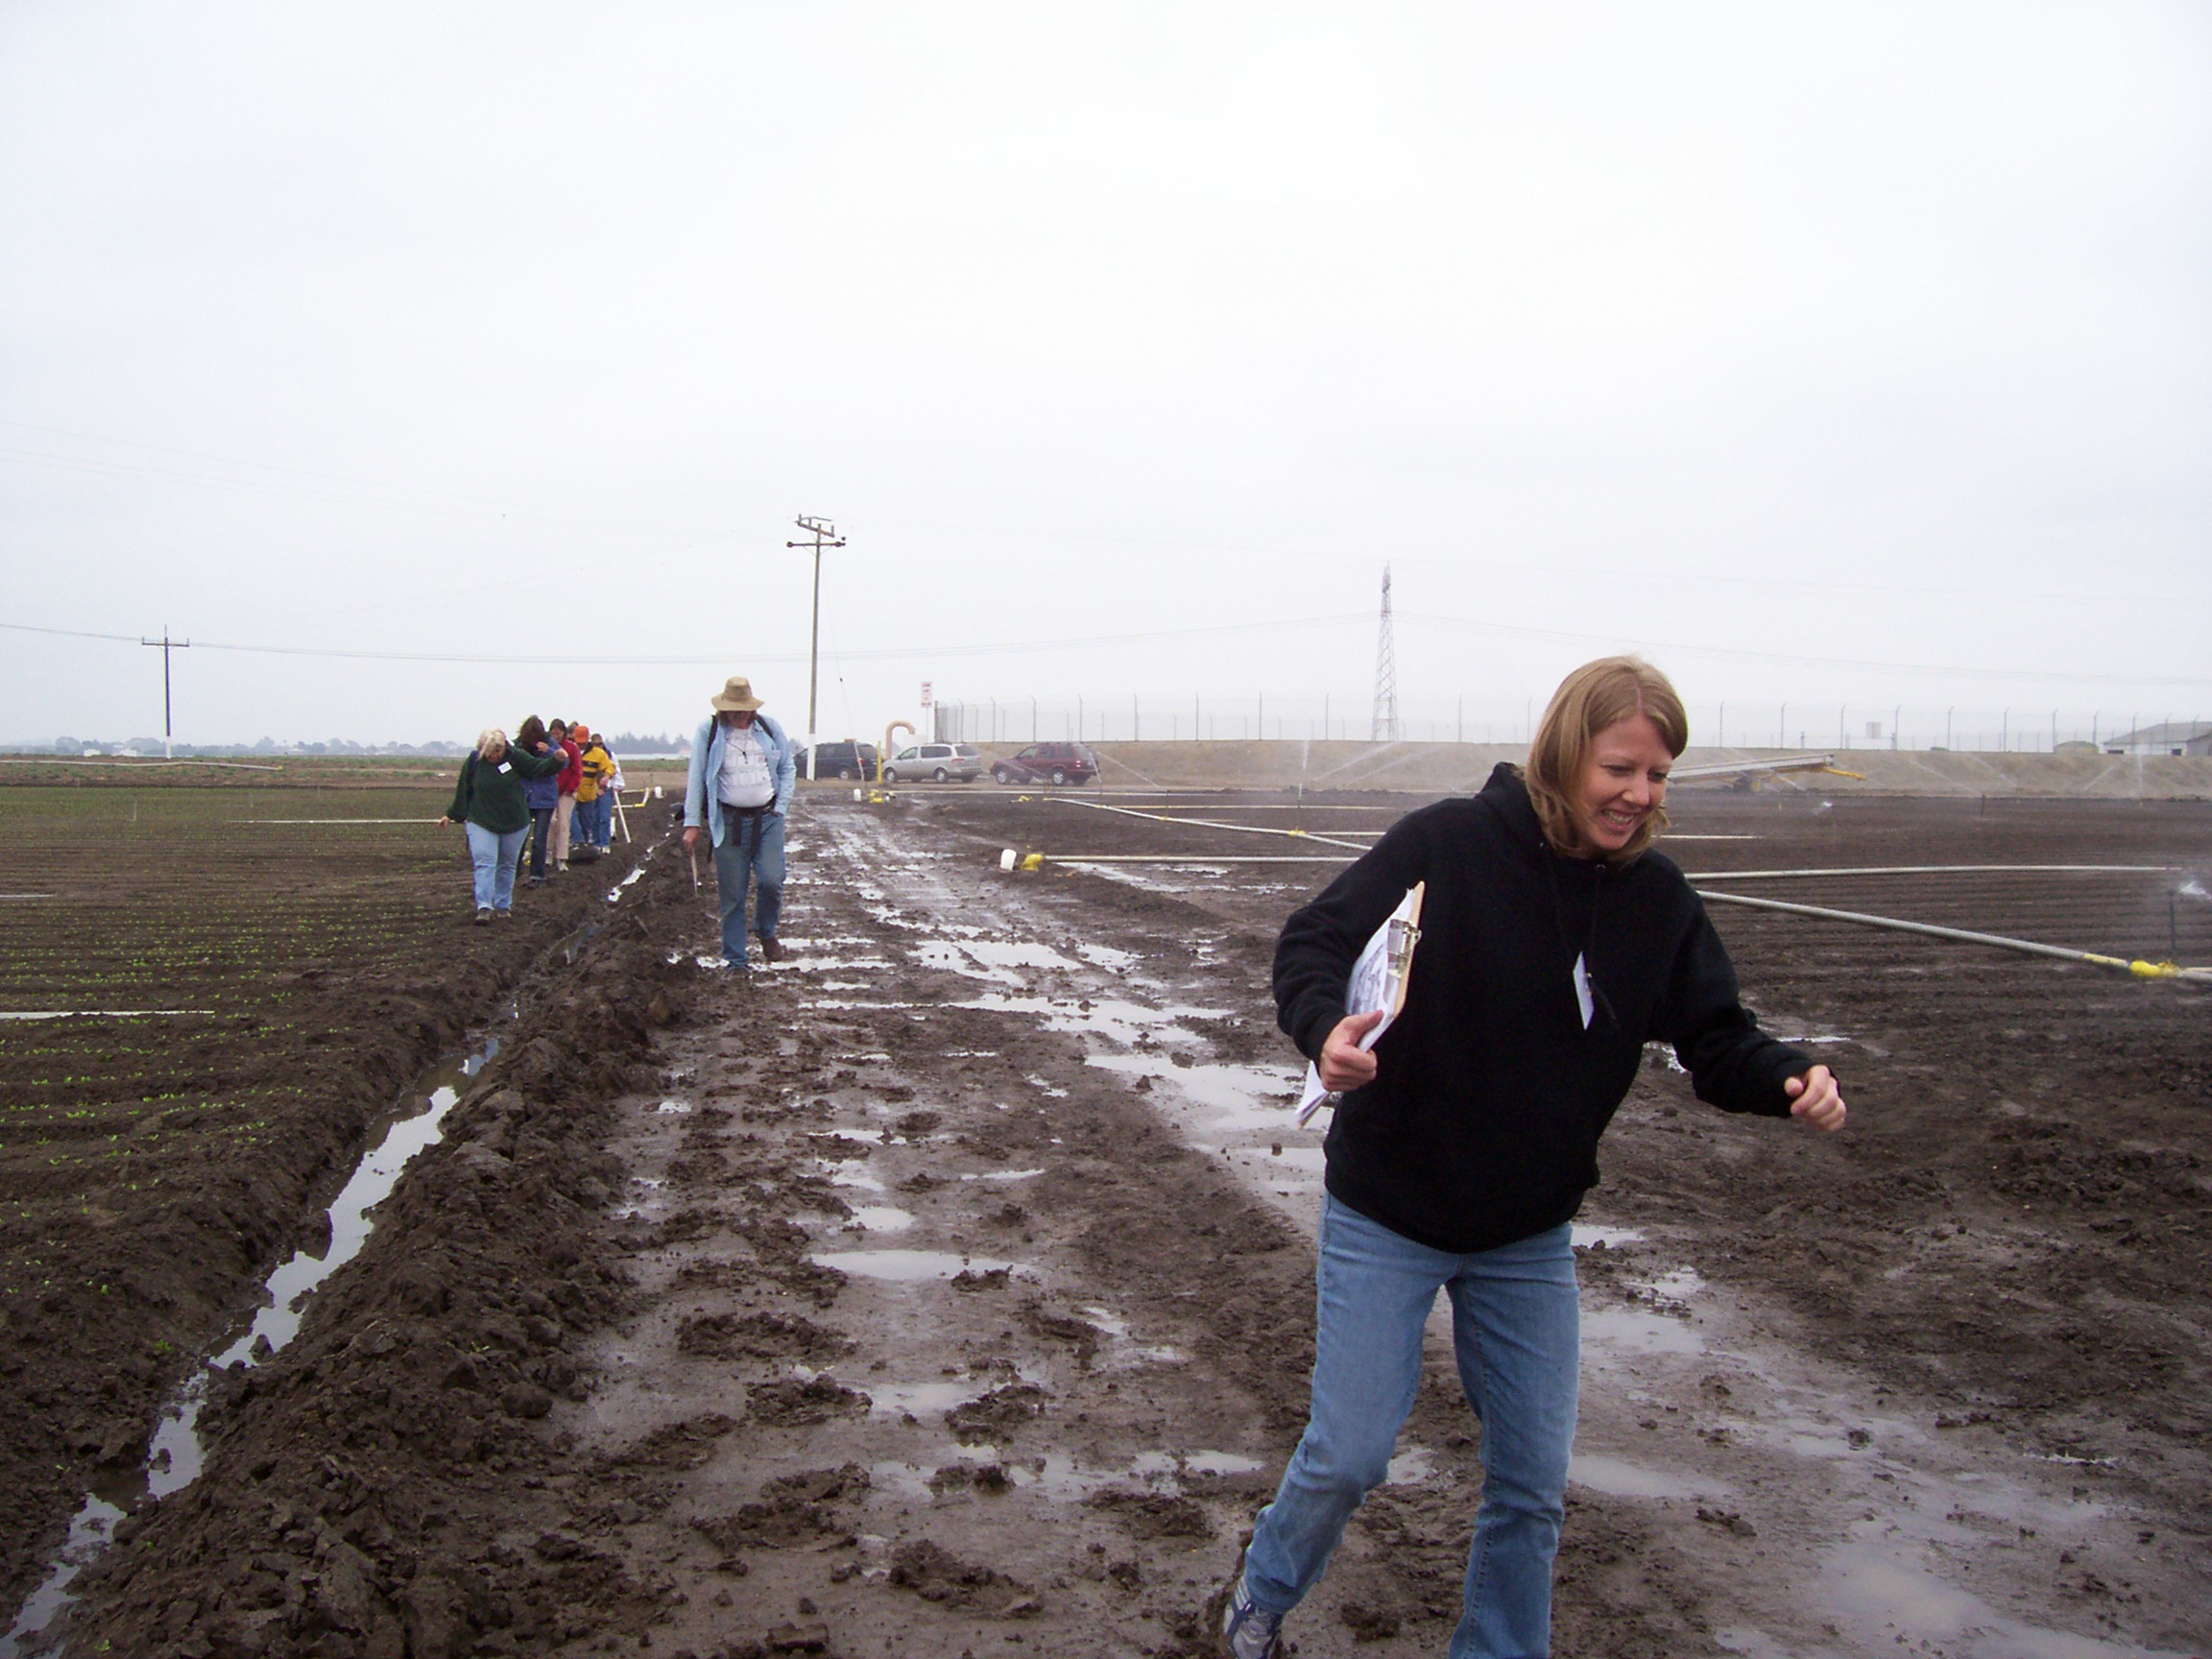 Slogging through mud on a quest to sample water quality